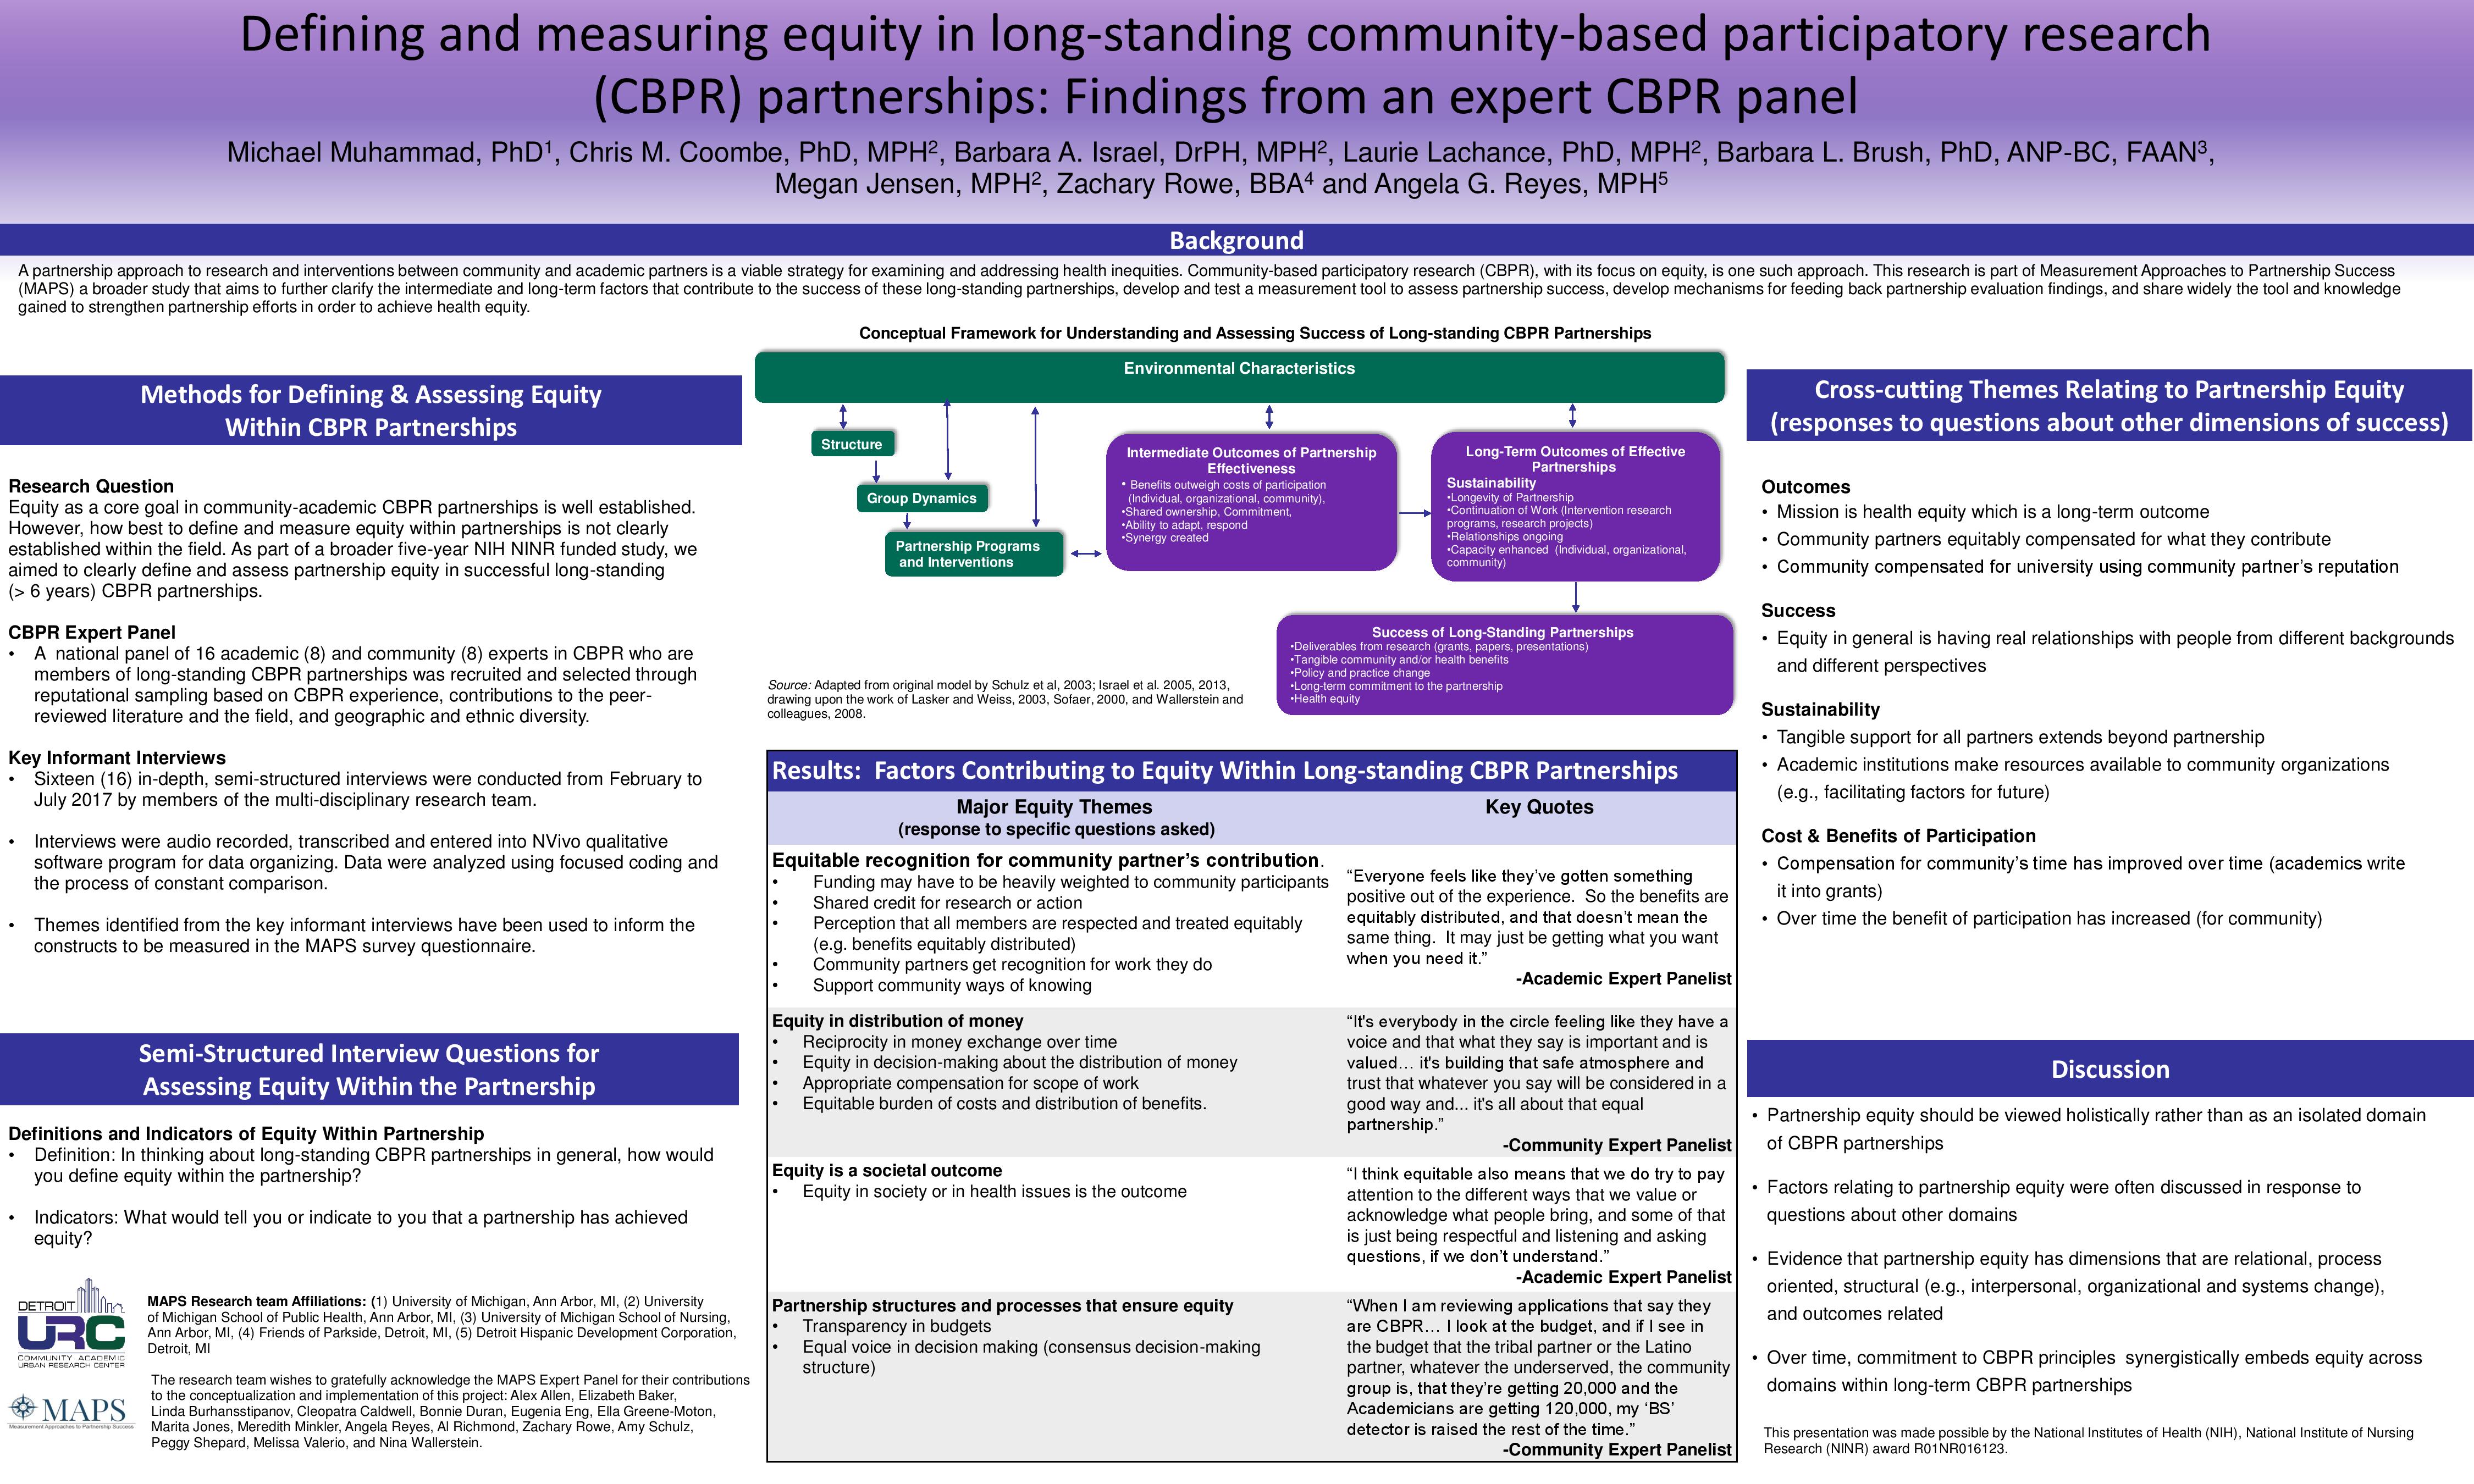 APHA 2018 MAPS Partnership Equity Poster FINAL page 001